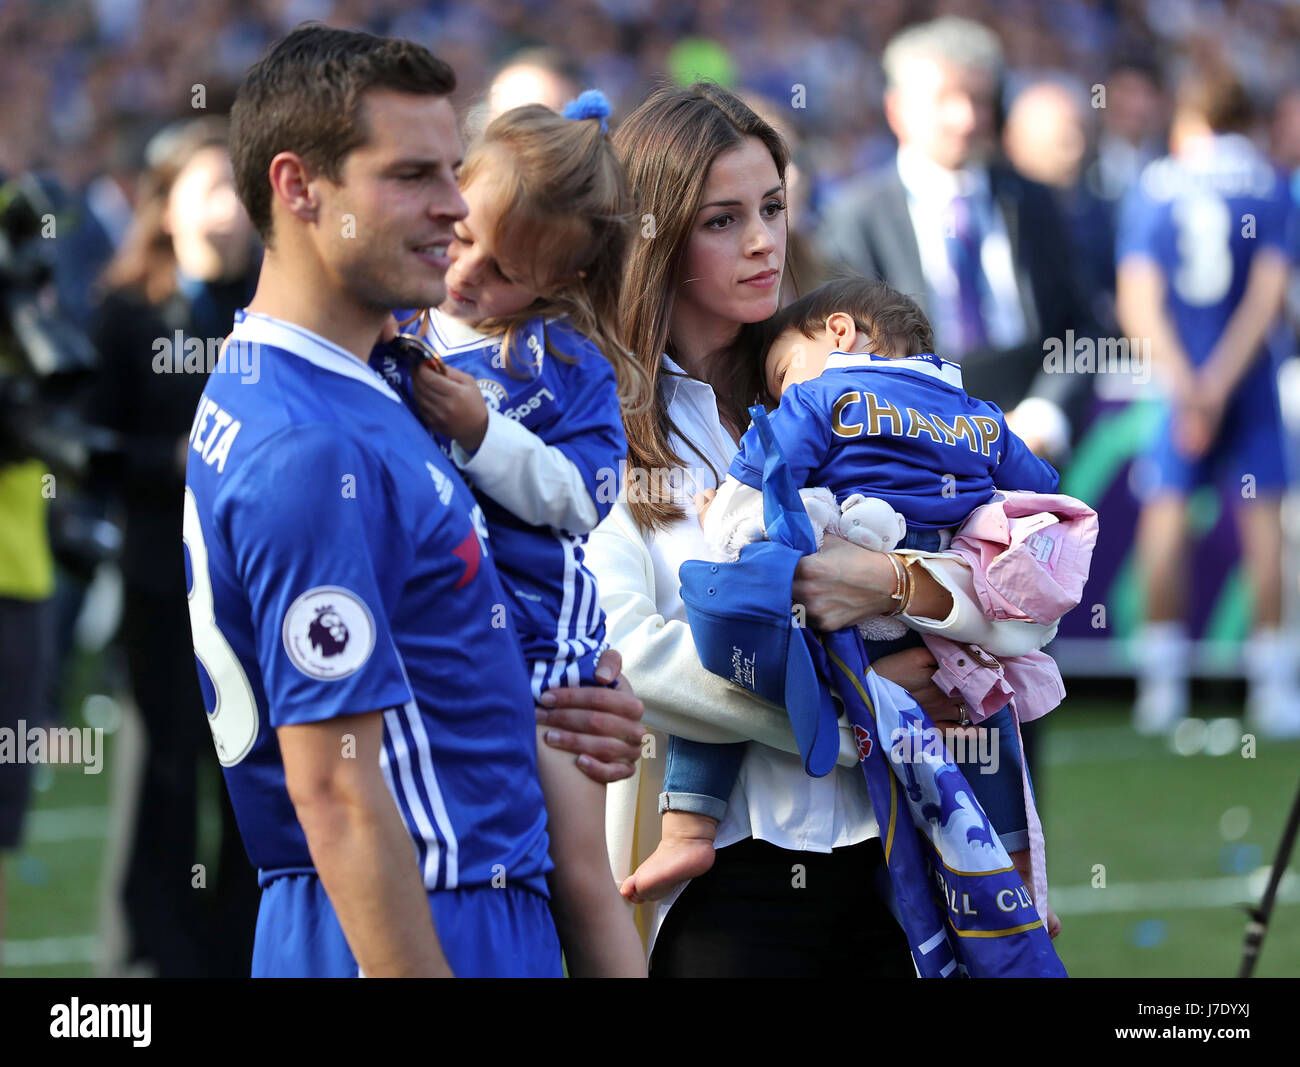 Chelsea's Cesar Azpilicueta with his wife Adriana Azpilicueta and their children, daughter Martina (left) and their other child during the celebrations after the game Stock Photo